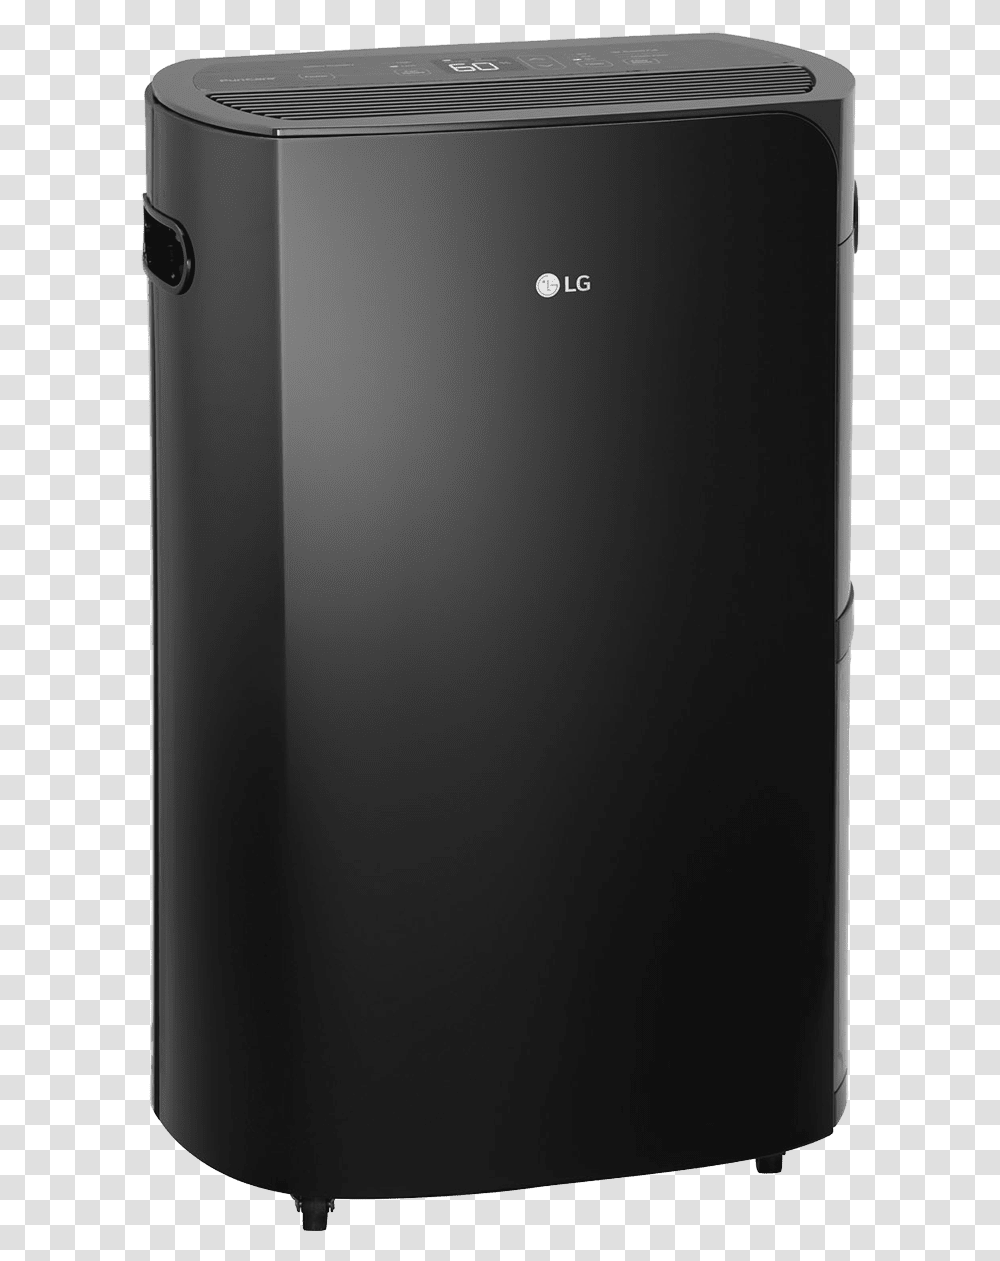 Lg 70 Pint Energy Star Dehumidifier Lg Deshumidificador, Electronics, Phone, Mobile Phone, Cell Phone Transparent Png